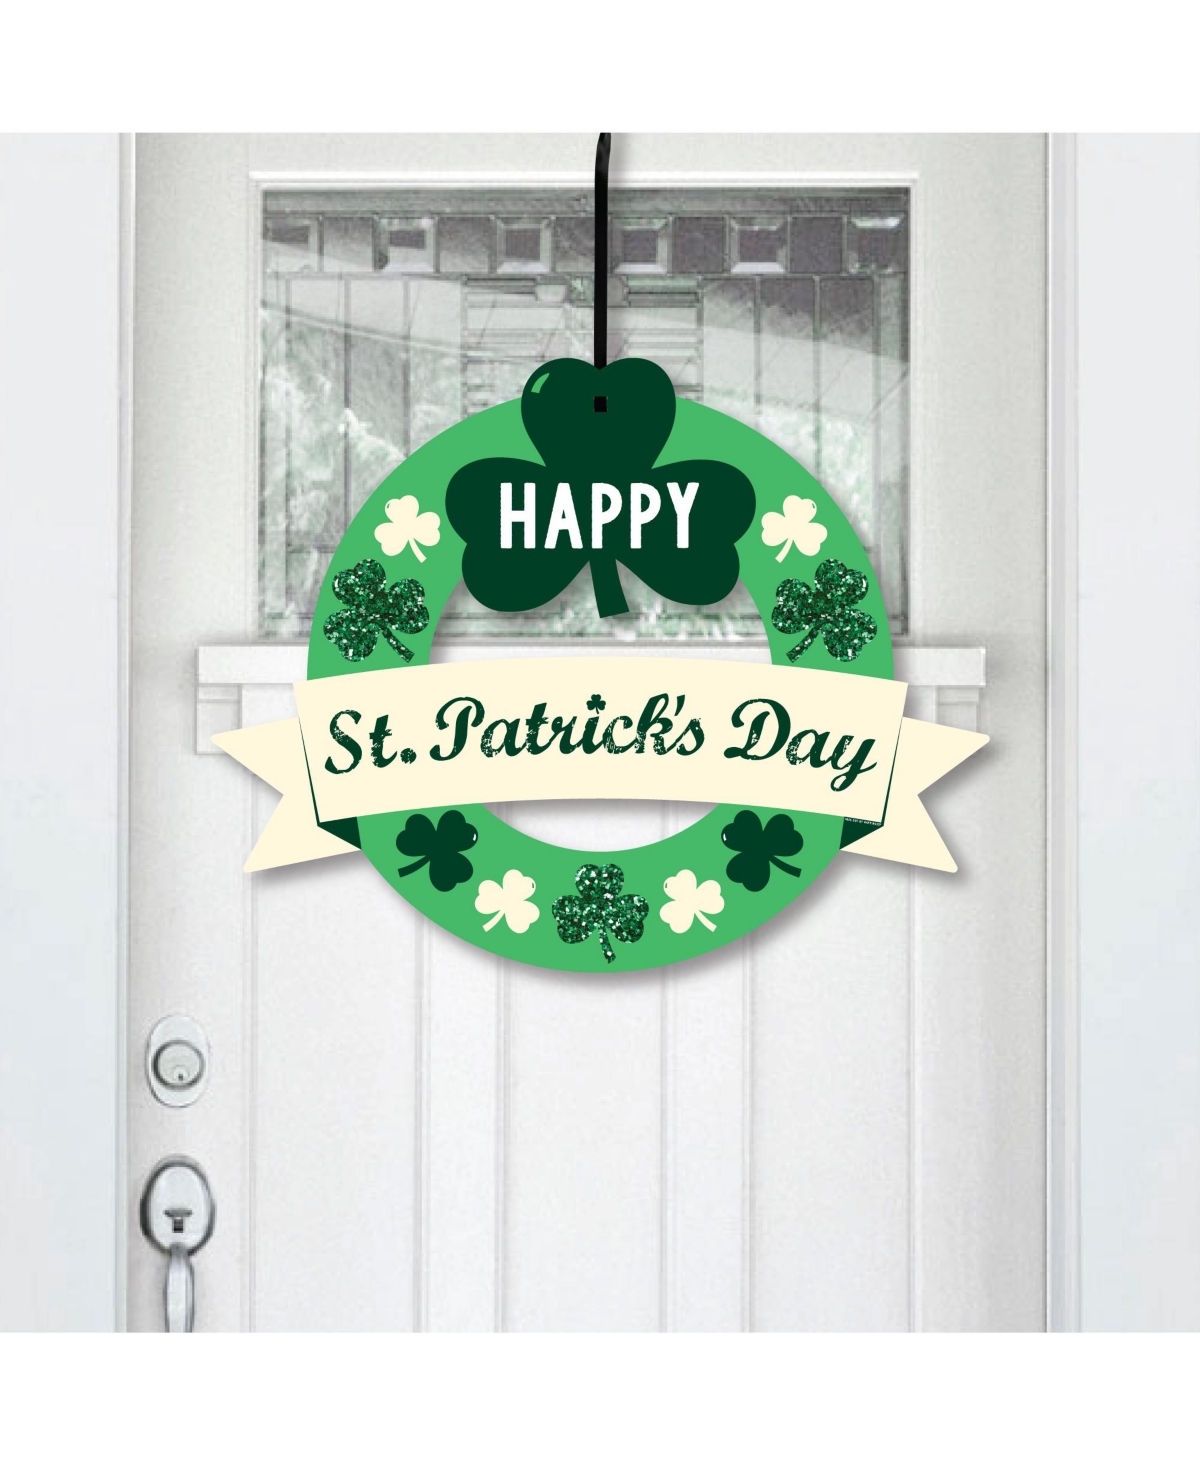 St. Patricks Day - Outdoor Saint Pattys Day Party Decor - Front Door Wreath